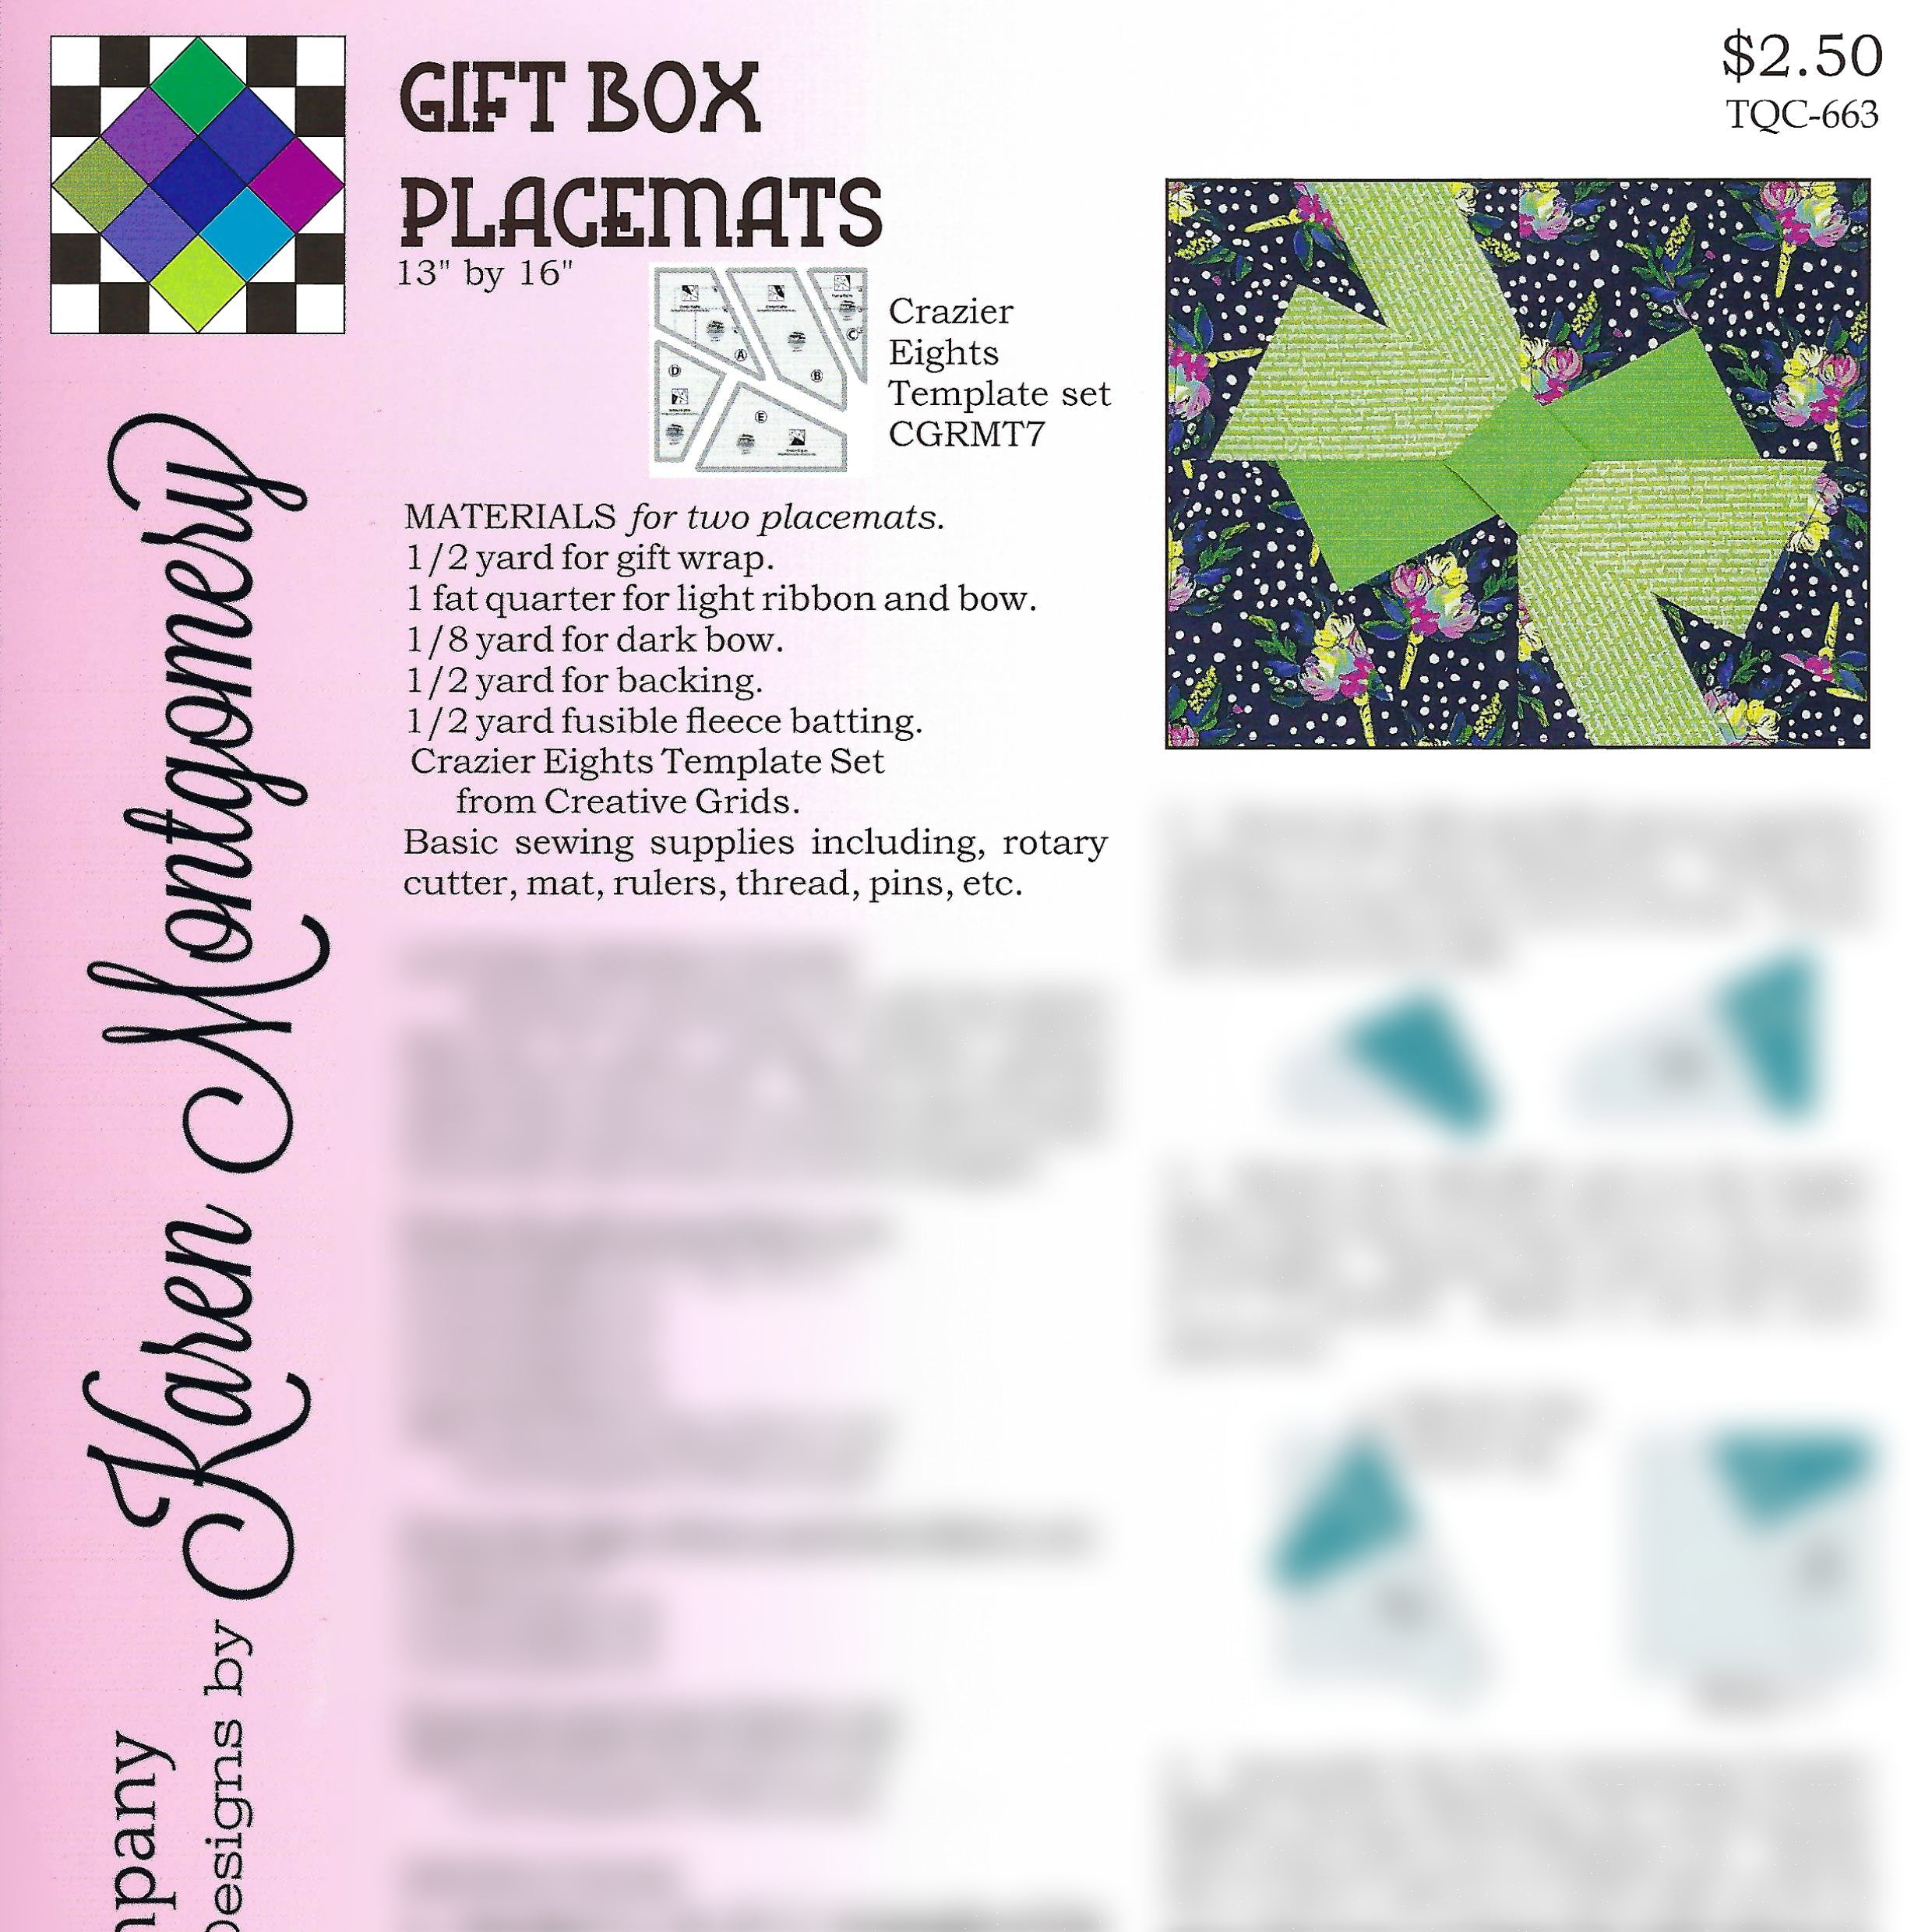 Gift Box Placemats Project Sheet